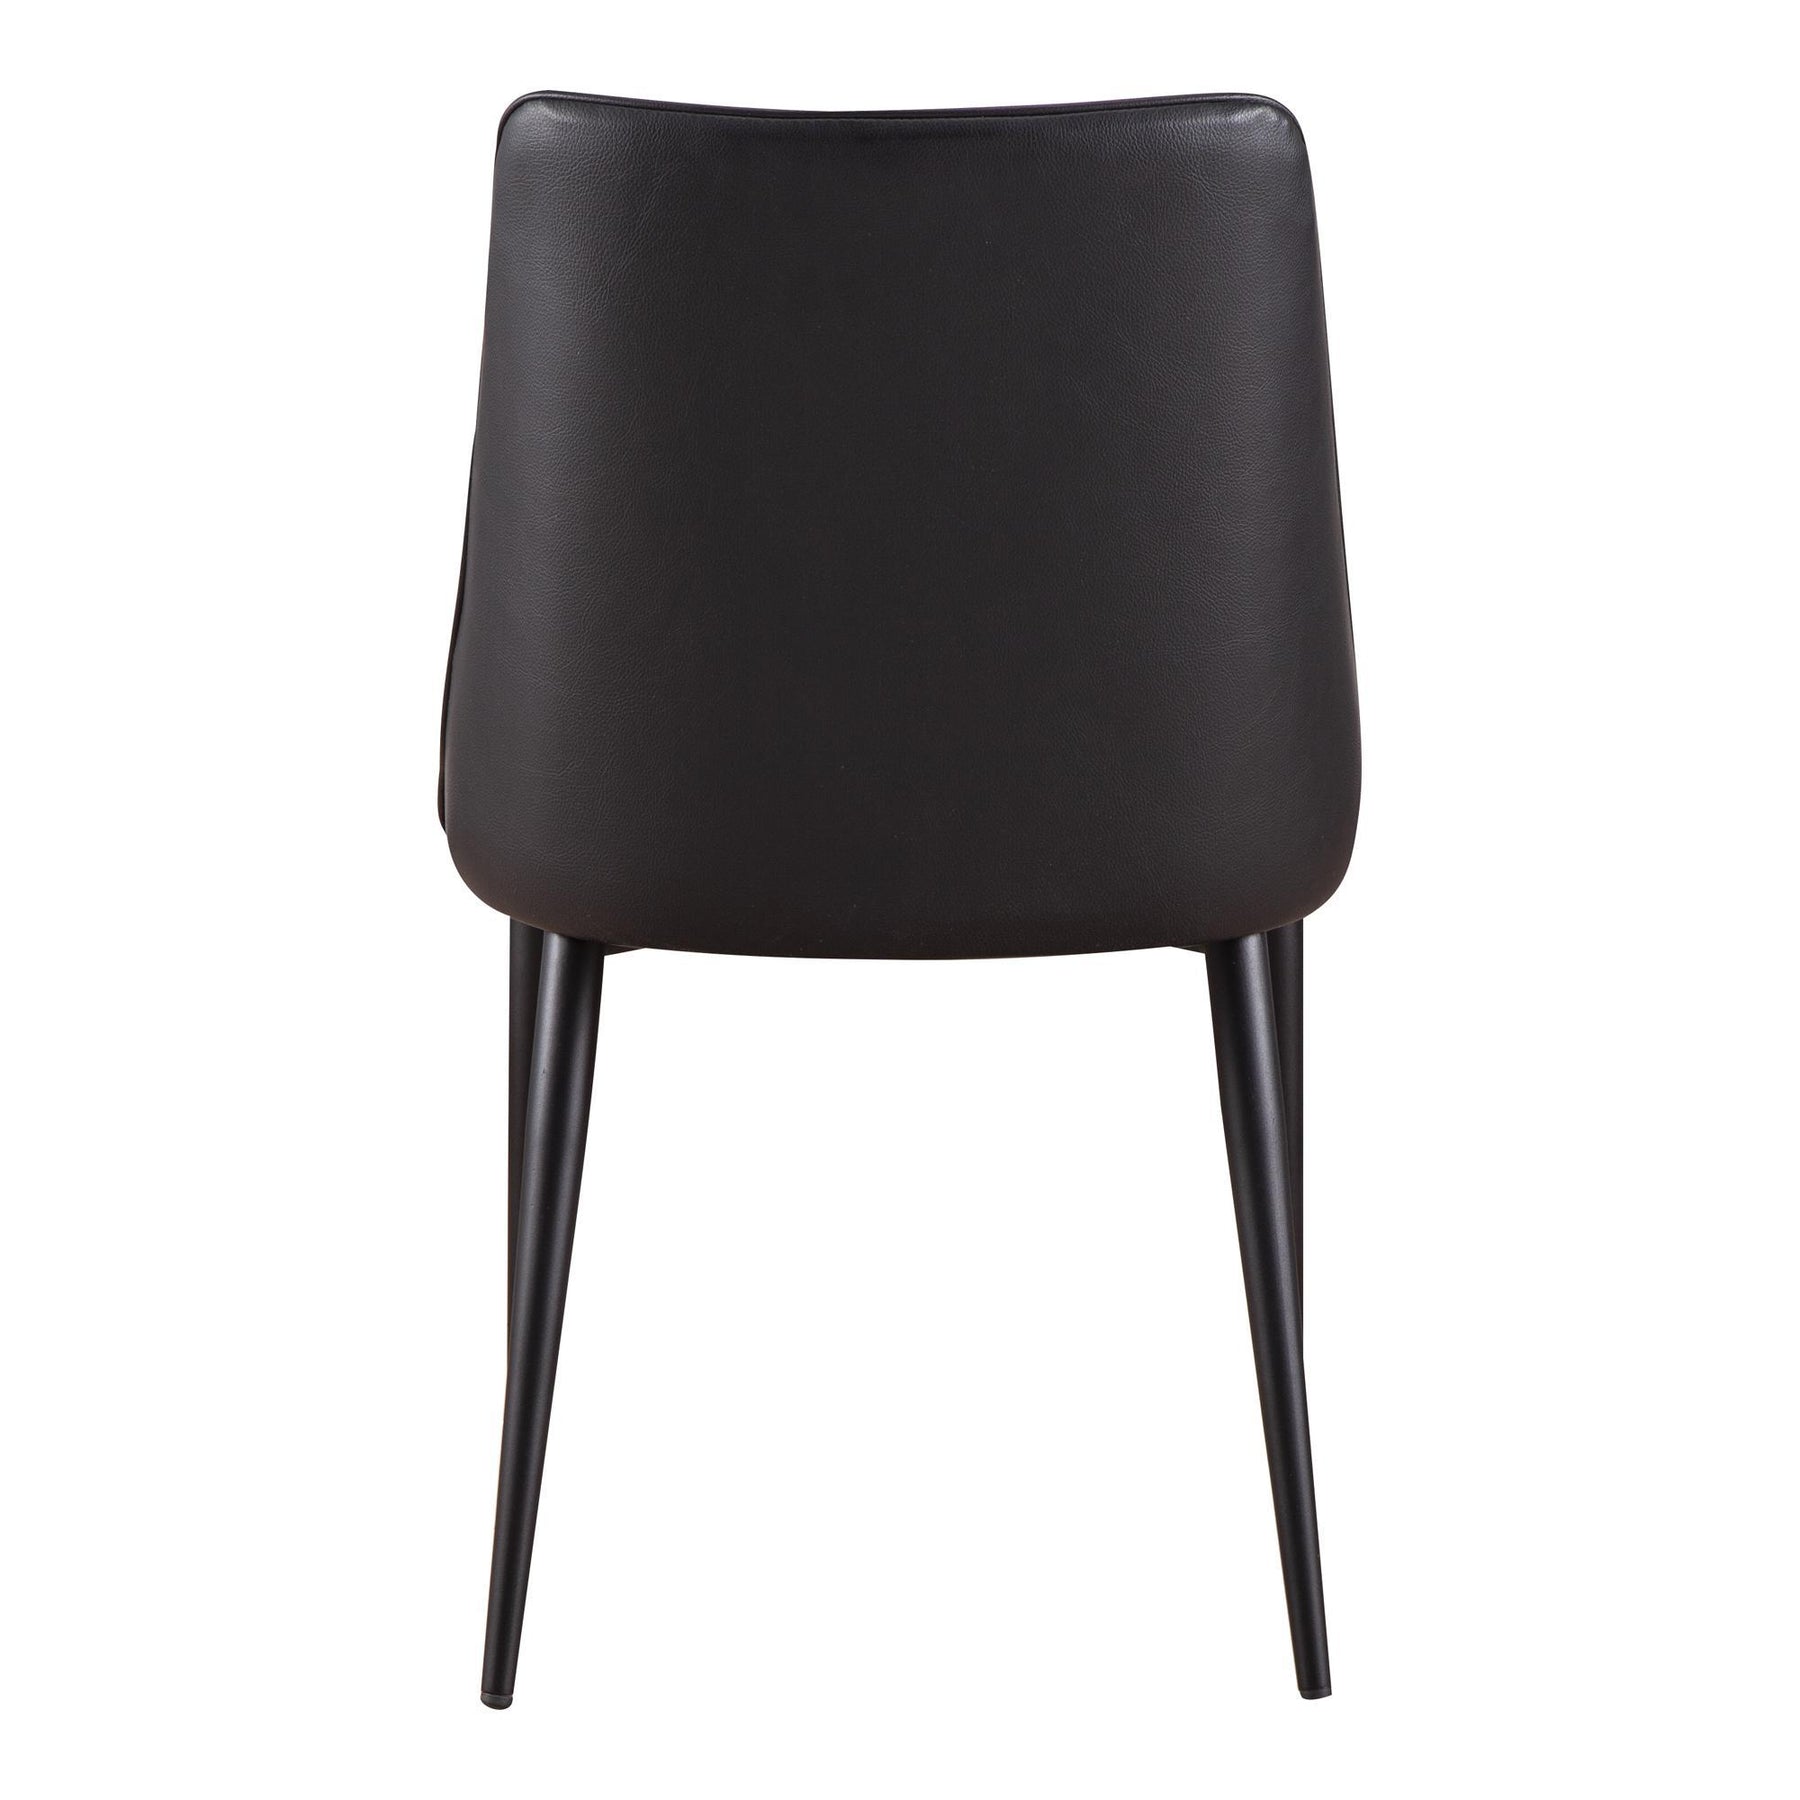 Moe's Home Collection Lula Dining Chair Black-M2 - YM-1006-02